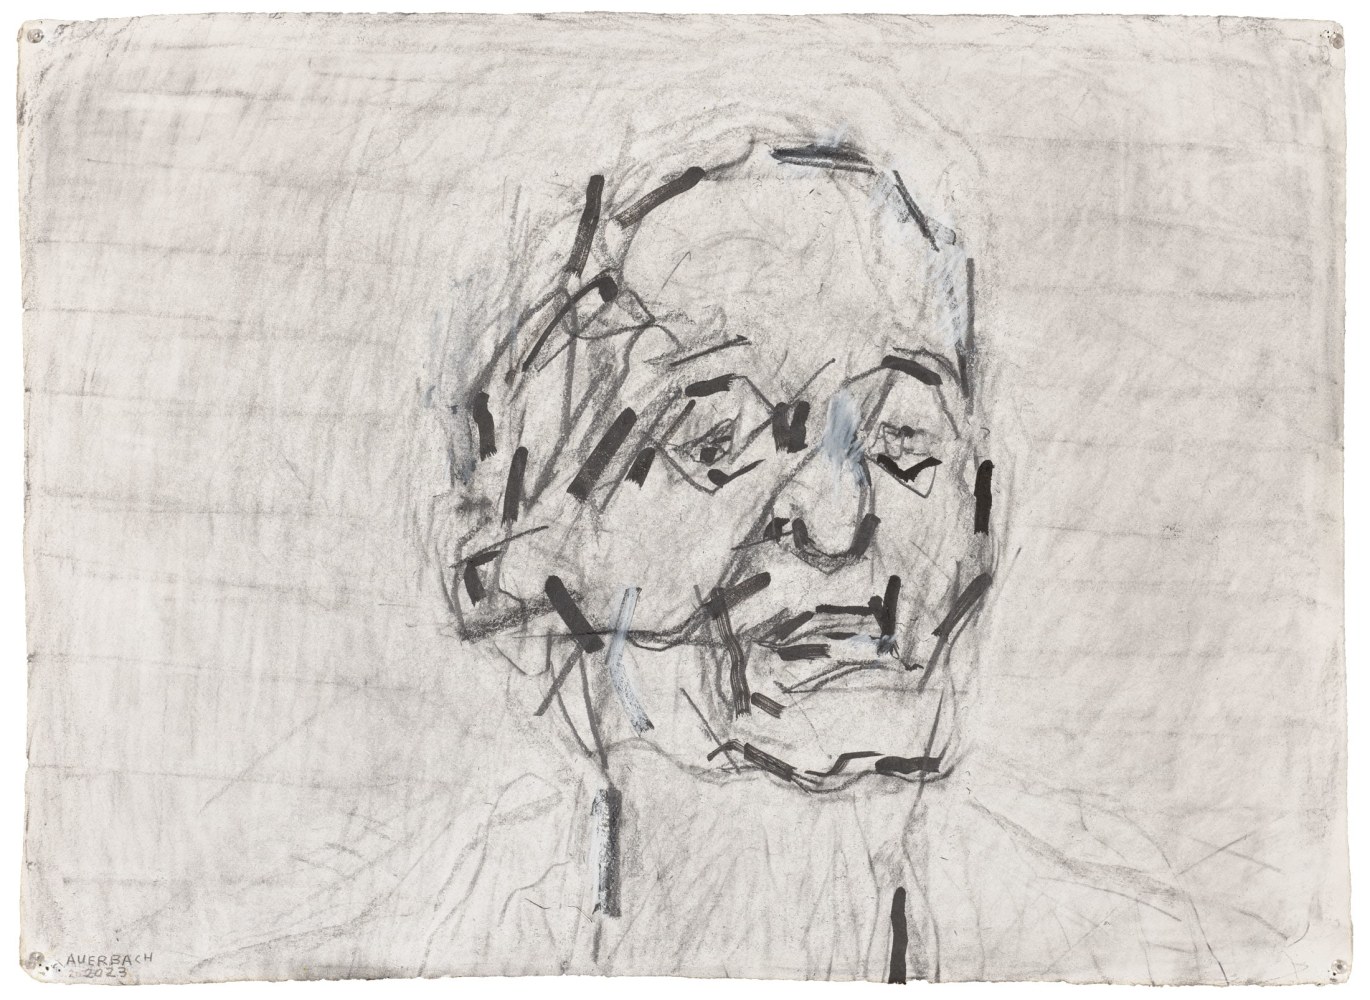 Frank Auerbach
Self-Portrait III, 2023
Graphite, Indian ink, acrylic and white chalk on paper
22 1/4 x 30 1/2 inches
56.5 x 77.5 cm
Photo: A C Cooper, London